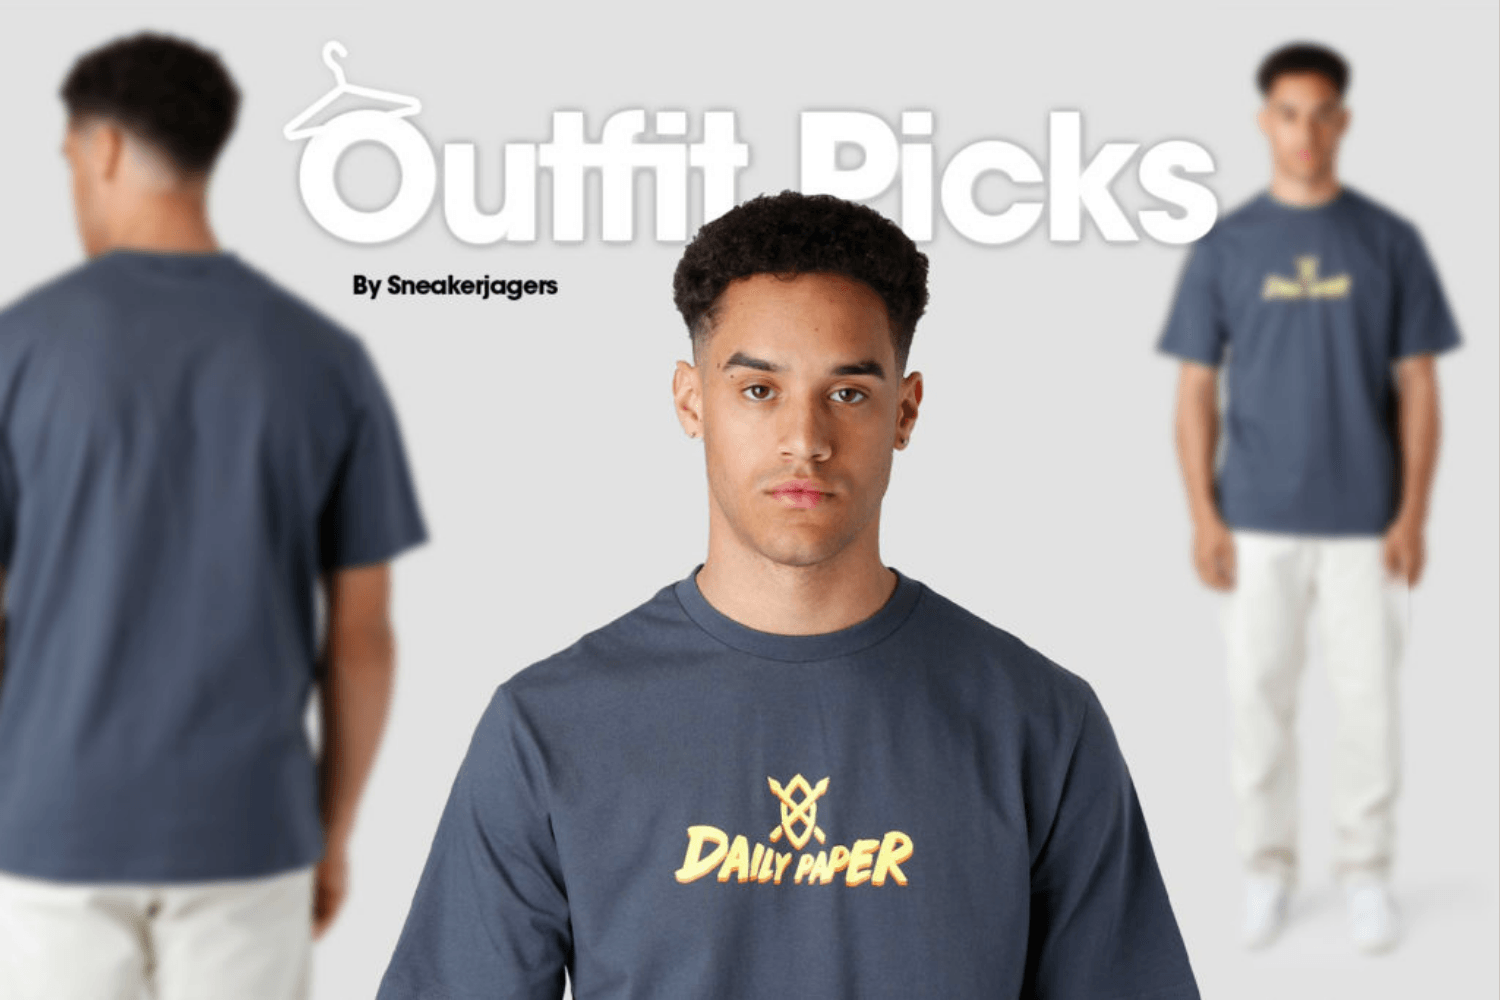 Outfit Picks by Sneakerjagers - Woche 23